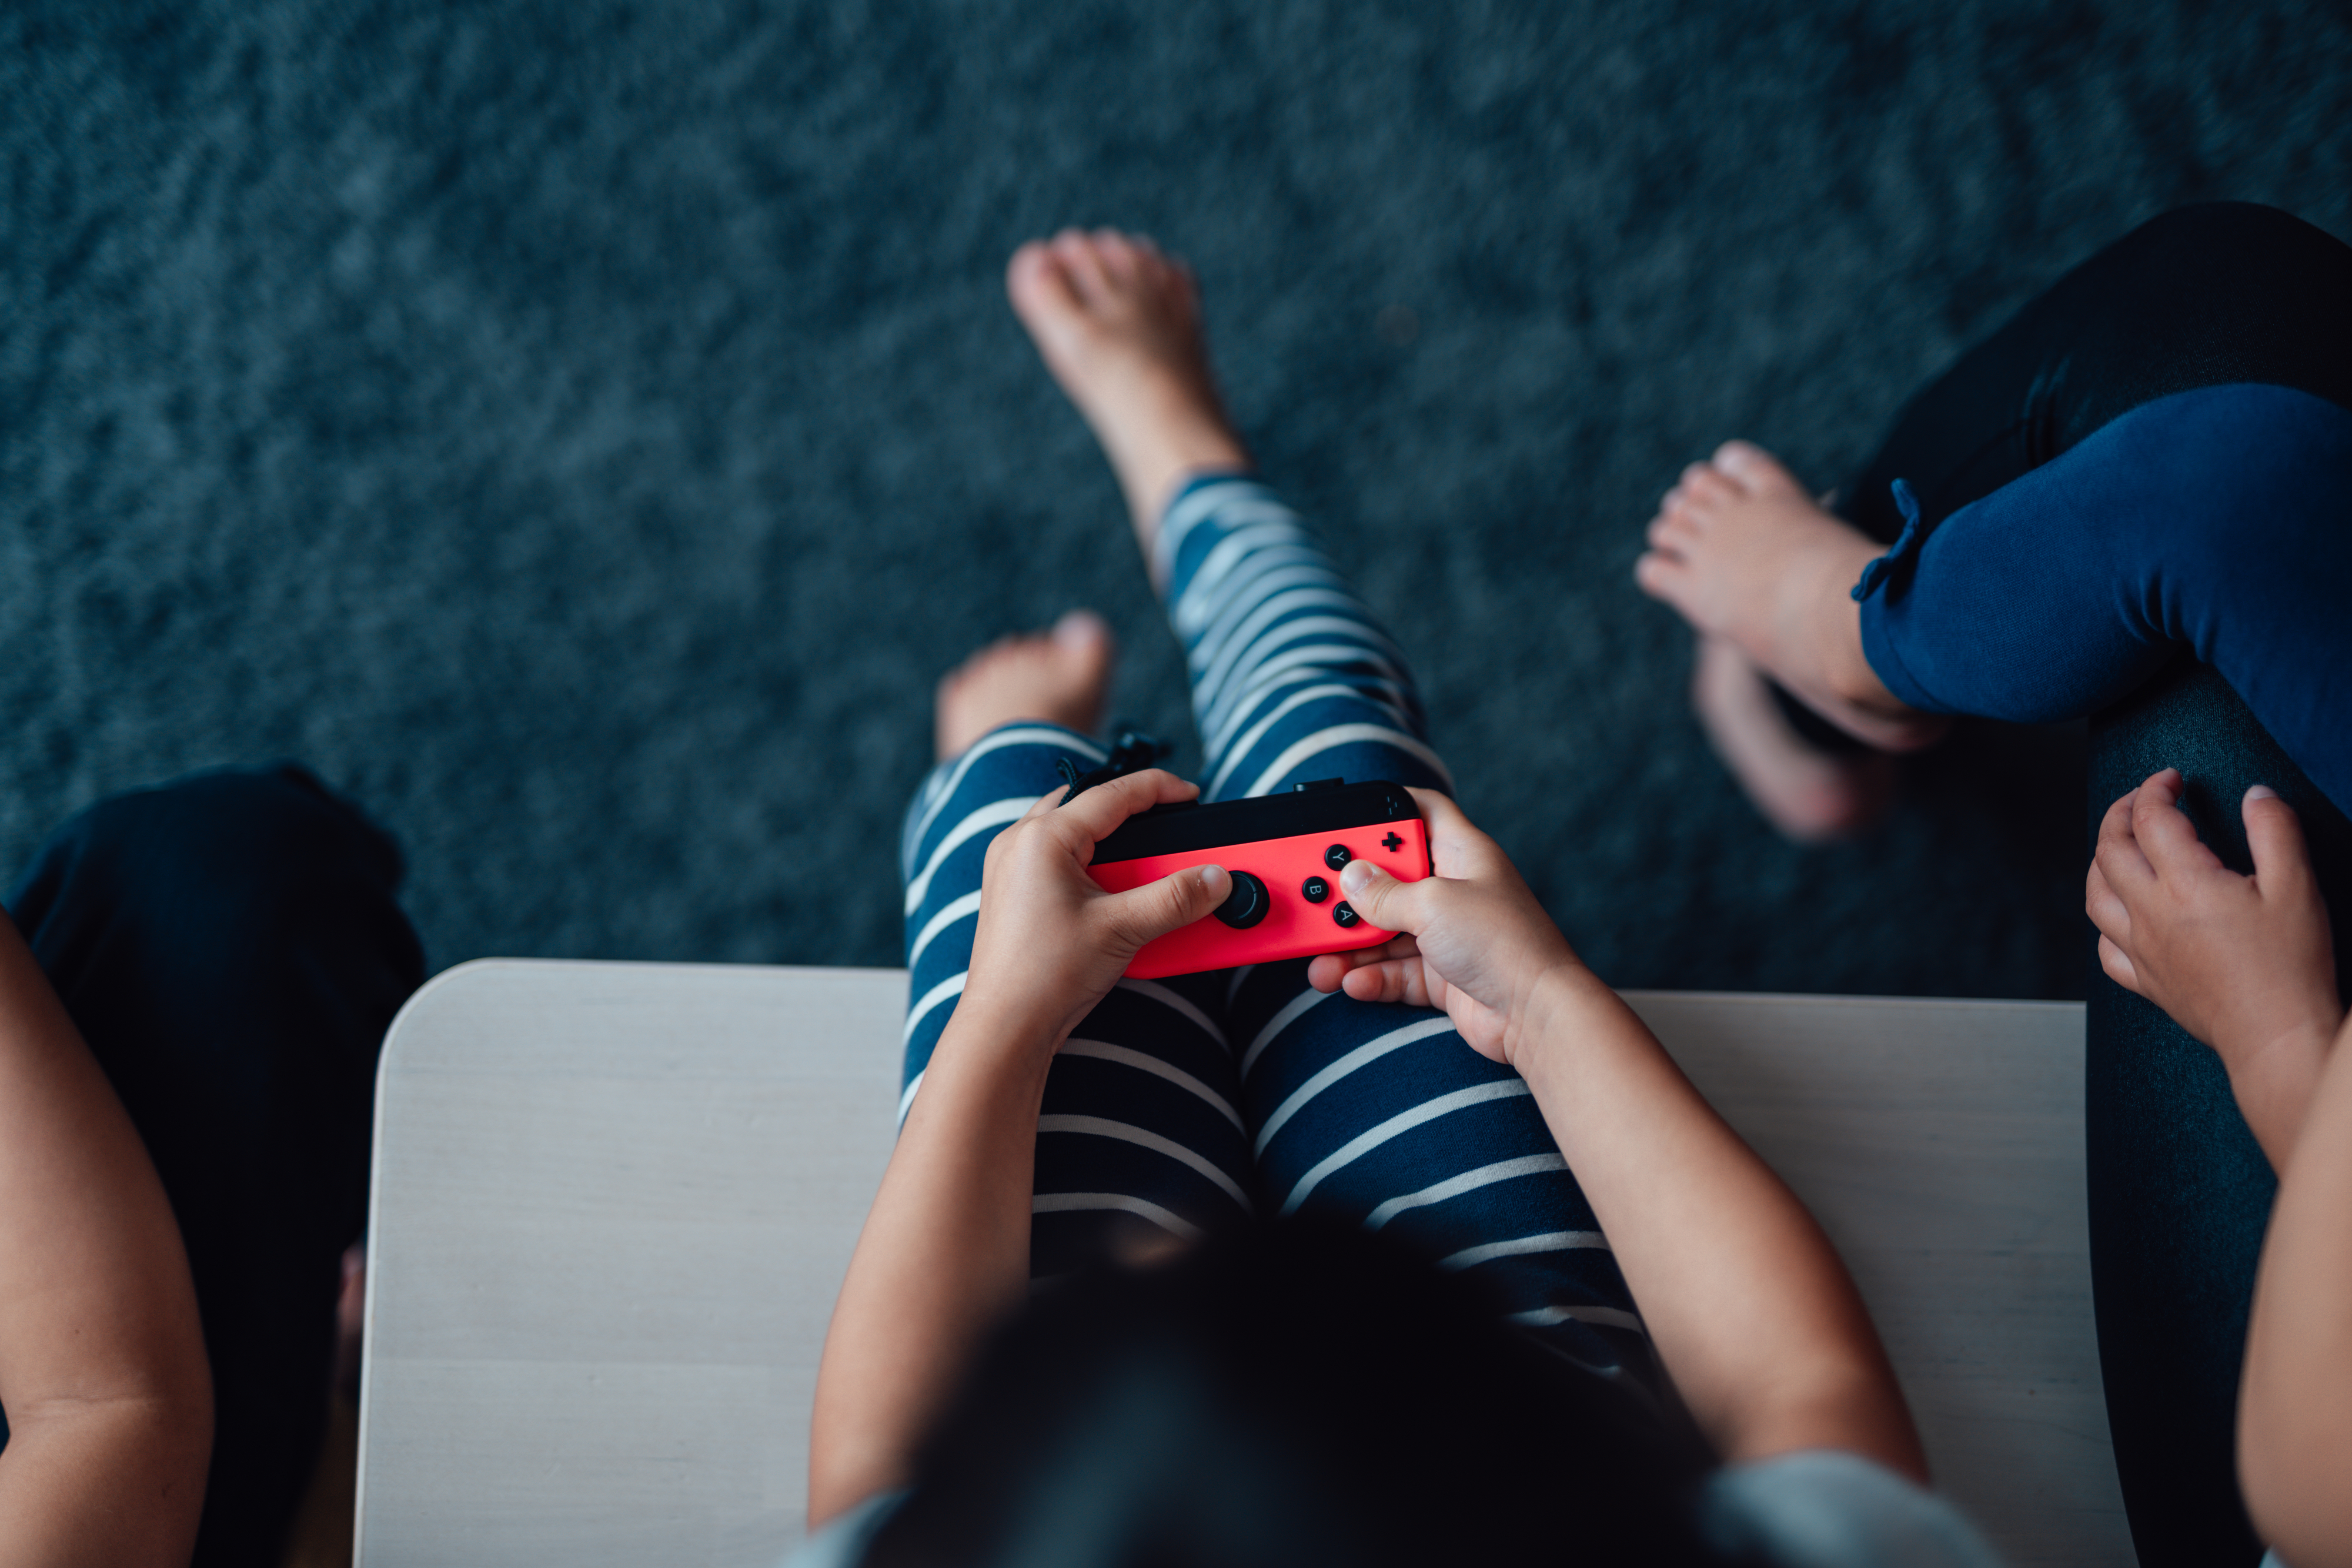 Top view of a child holding a game controller with another person seated nearby, suggesting shared playtime or parental supervision